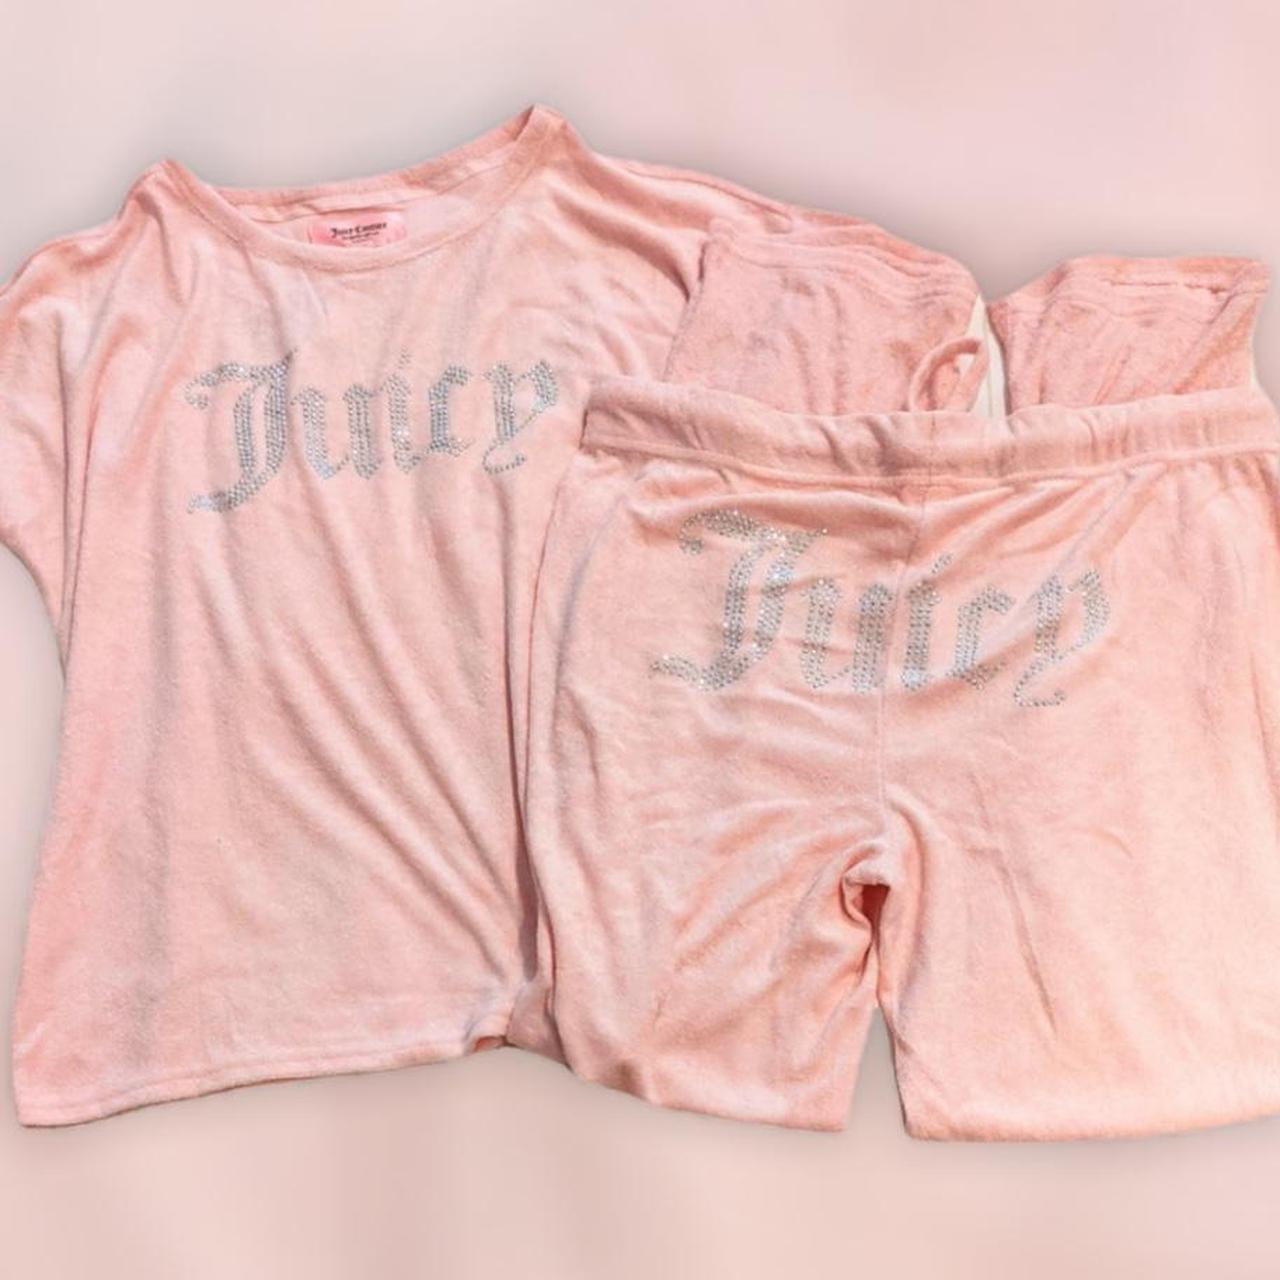 Juicy Couture baby pink Terry Cloth PJ/Lounge set.